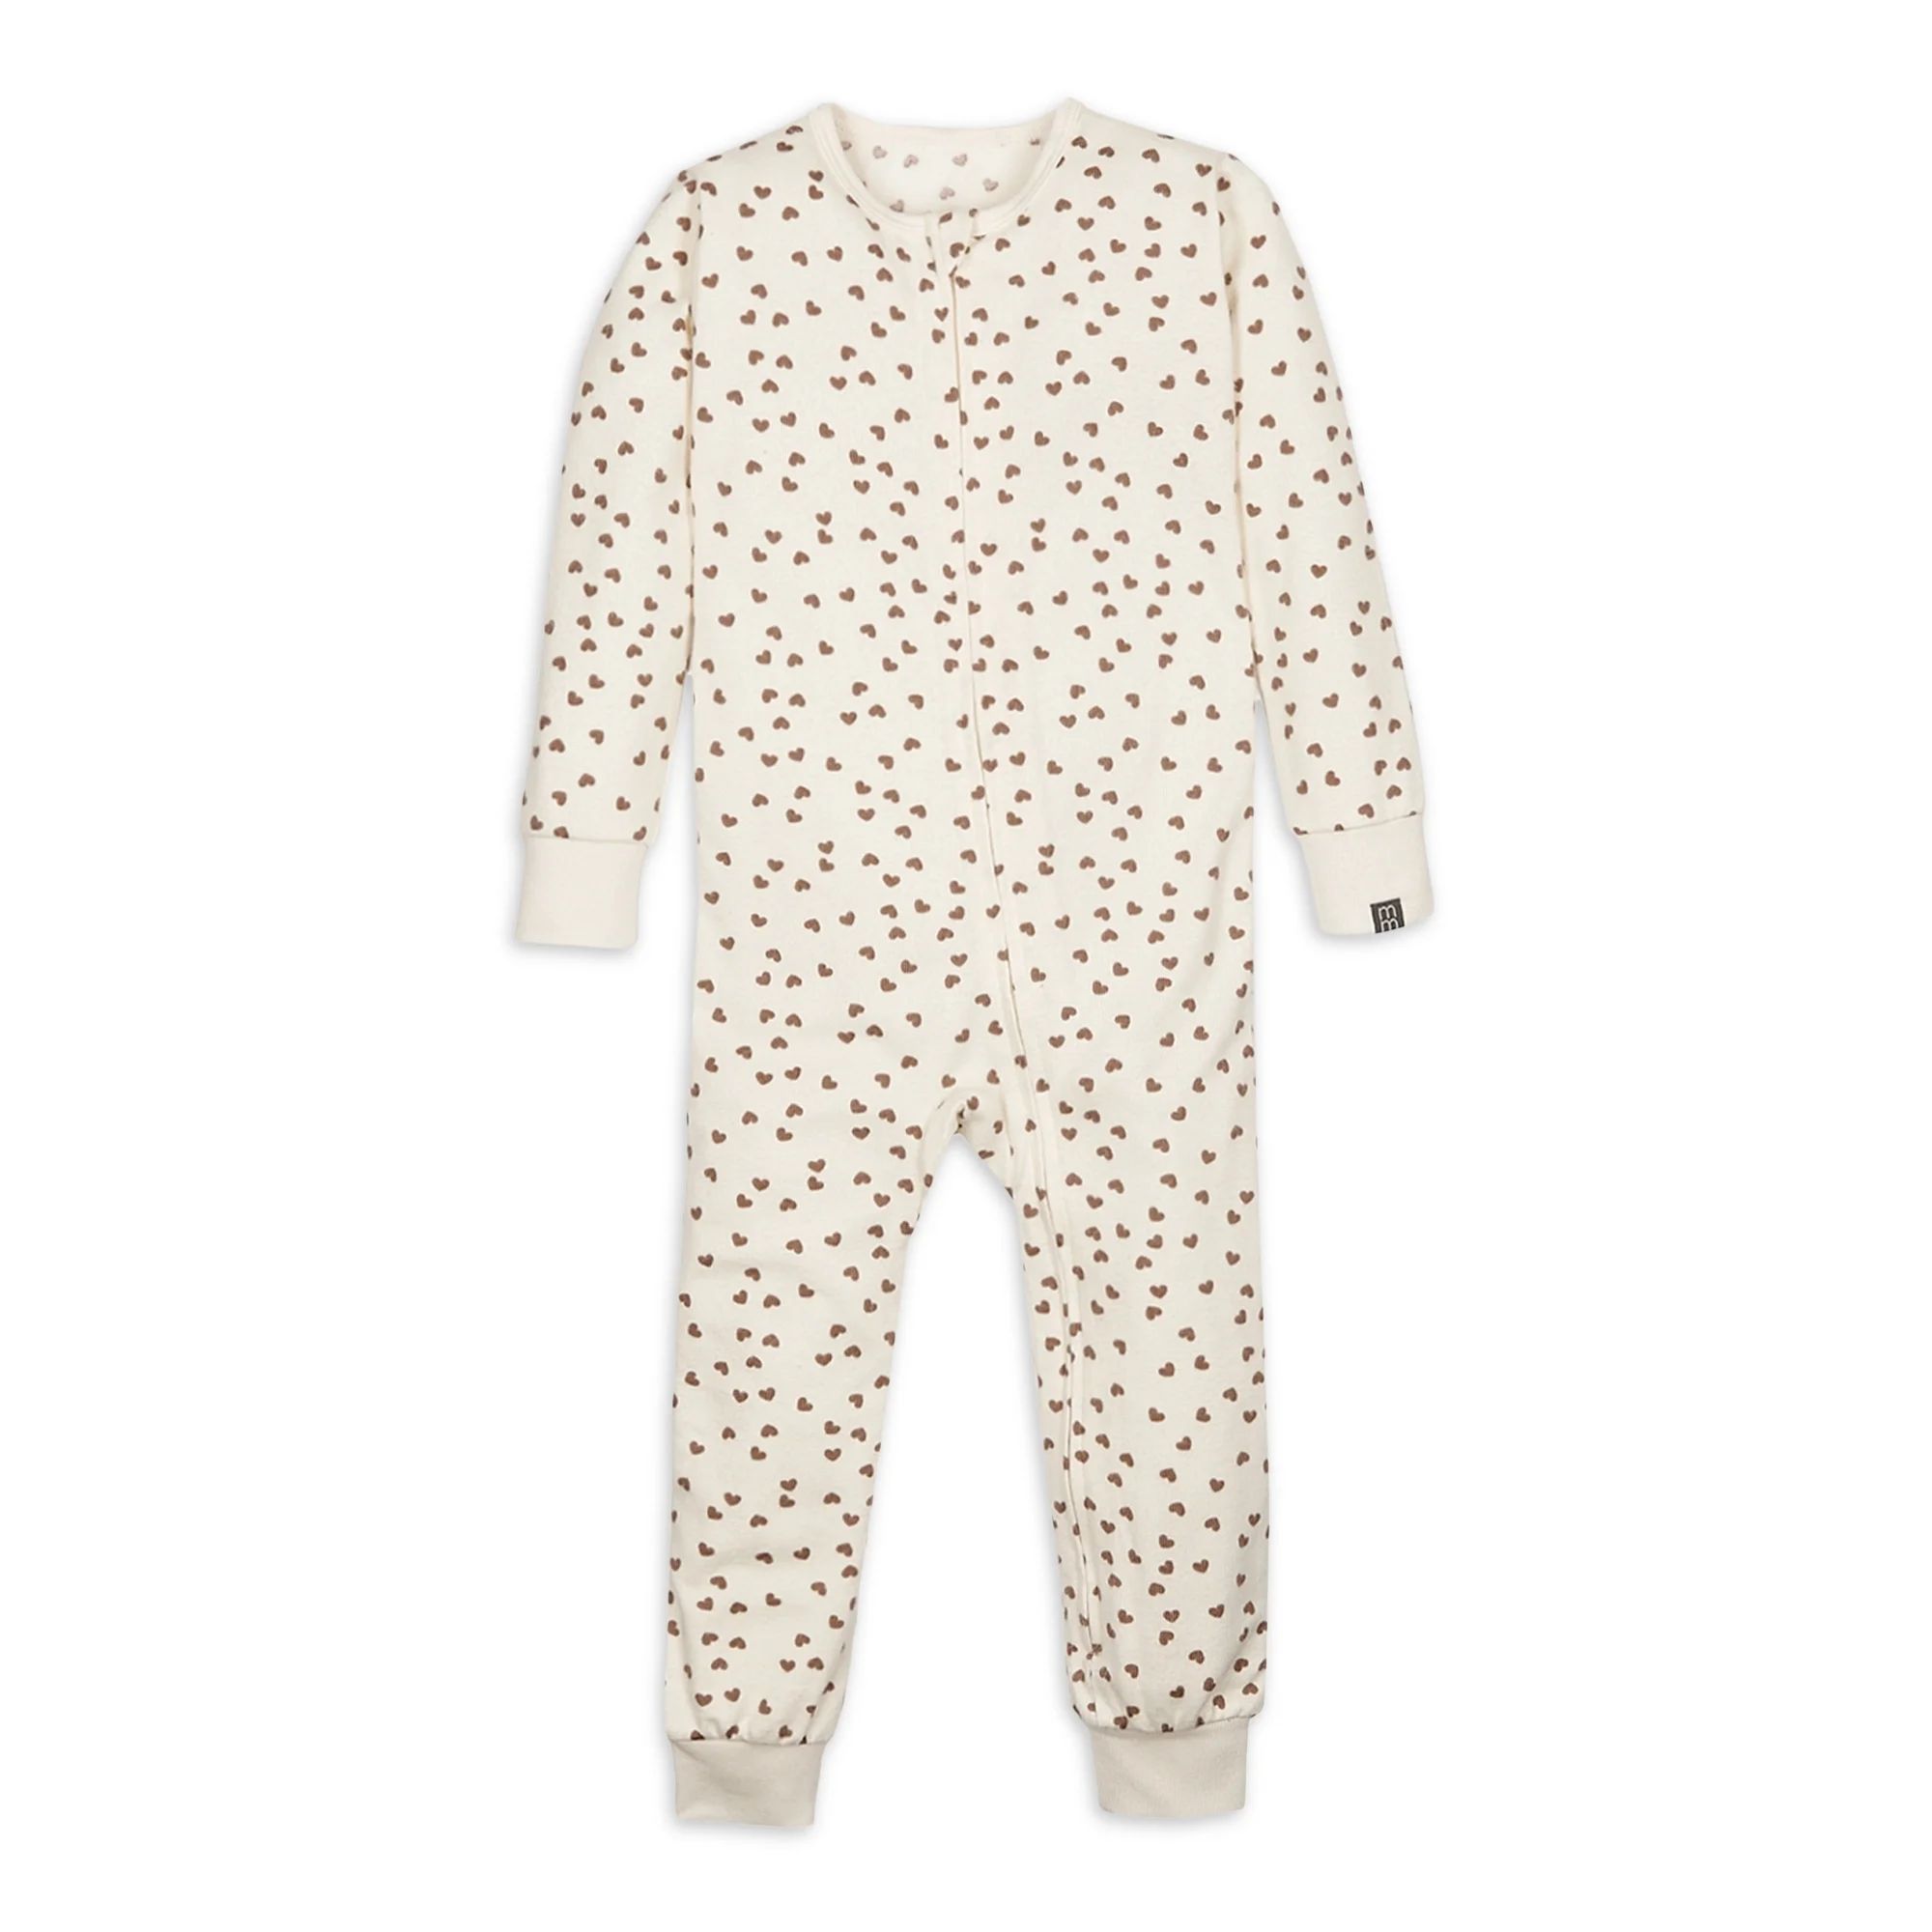 Modern Moments by Gerber Baby and Toddler Unisex Valentine's Day One-Piece Pajama, Sizes 12M-5T | Walmart (US)